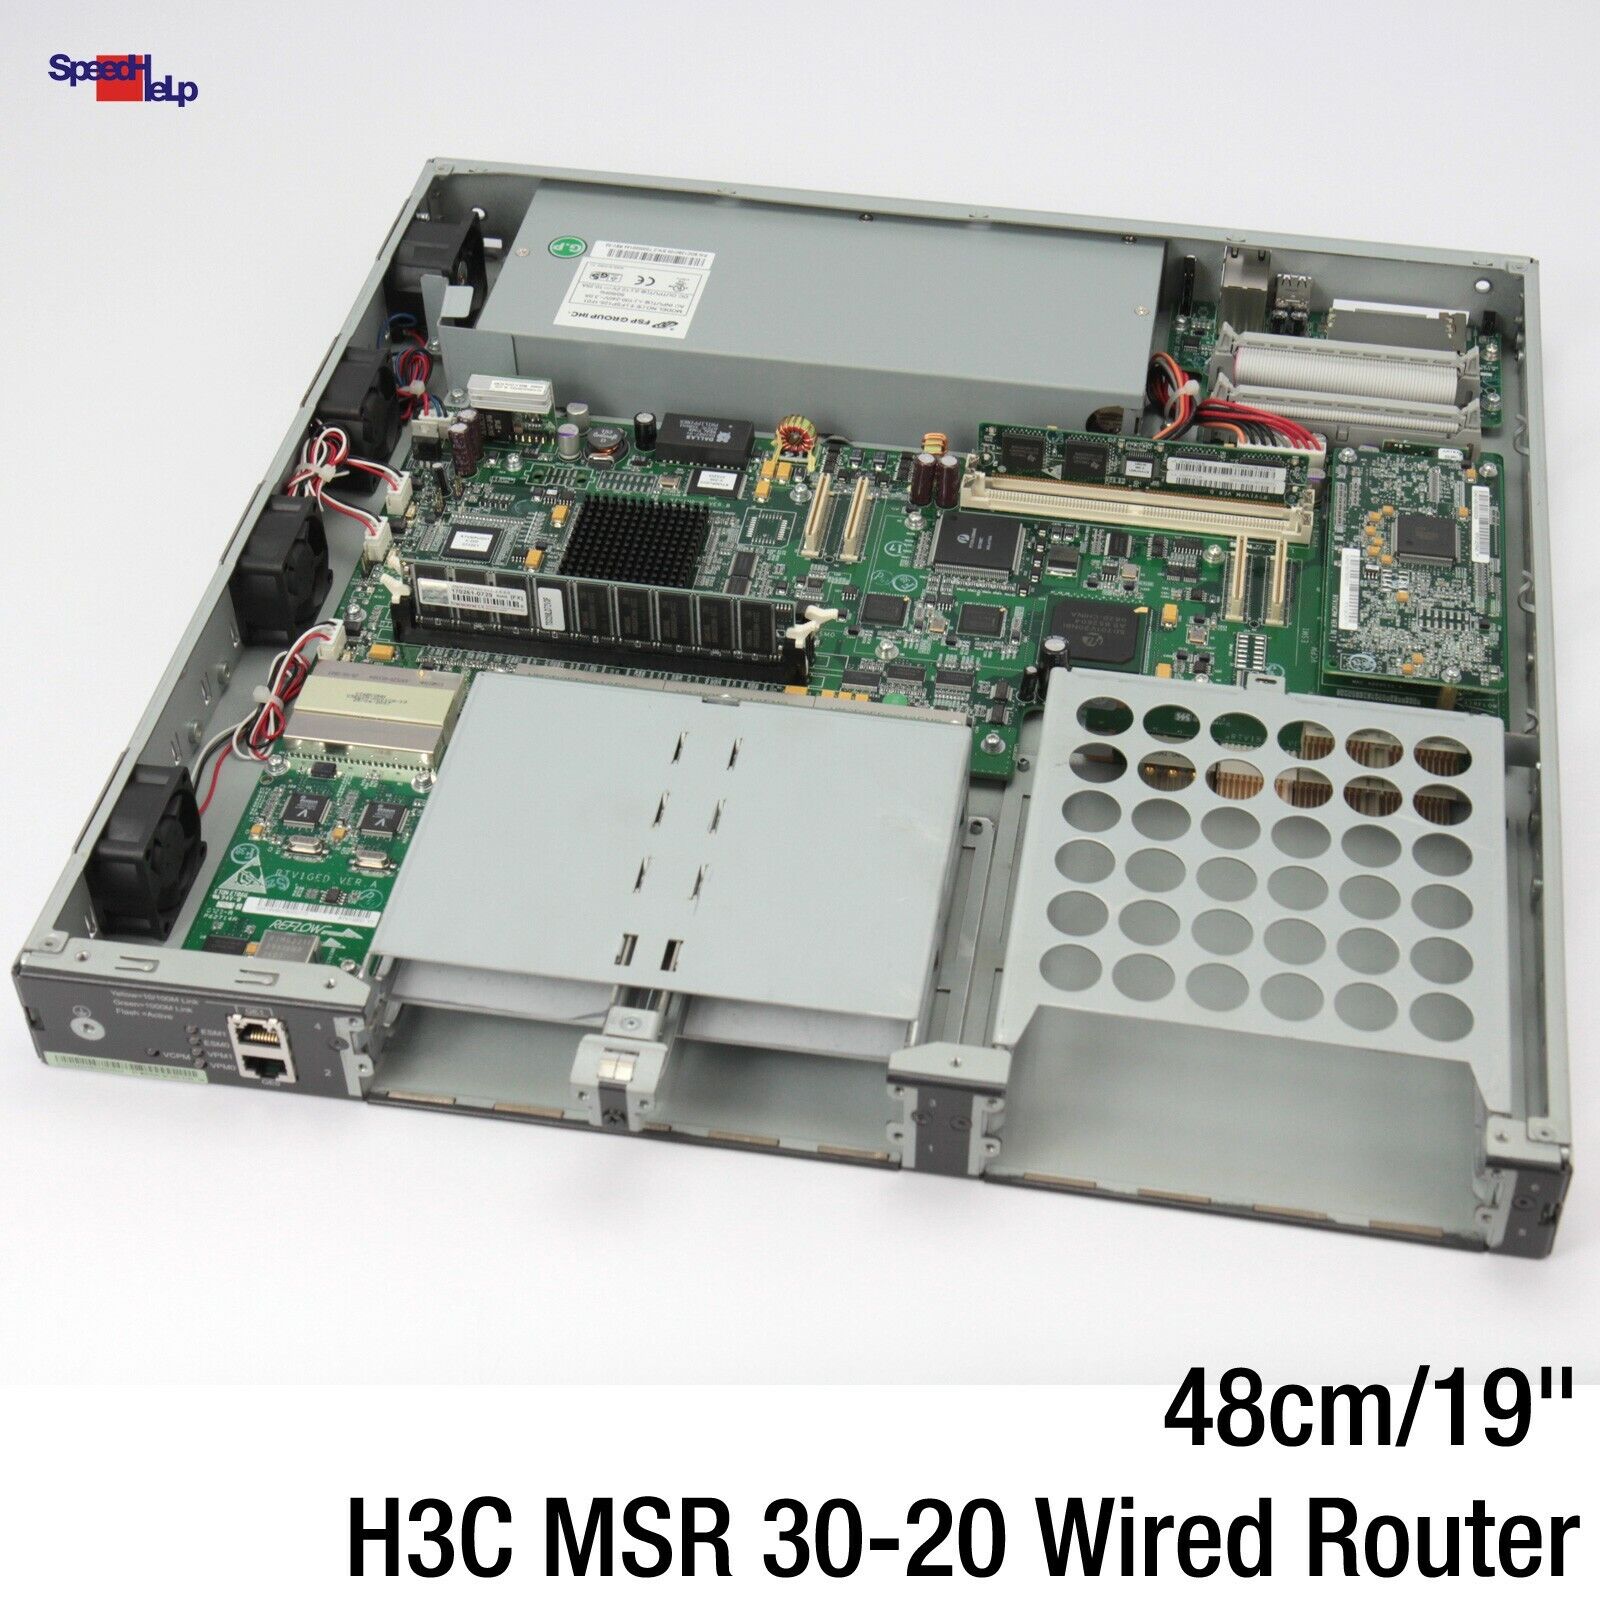 H3c MSR 30-20 Wired Router Vcpm + VPM32 FSP125-1F01 256MB RAM